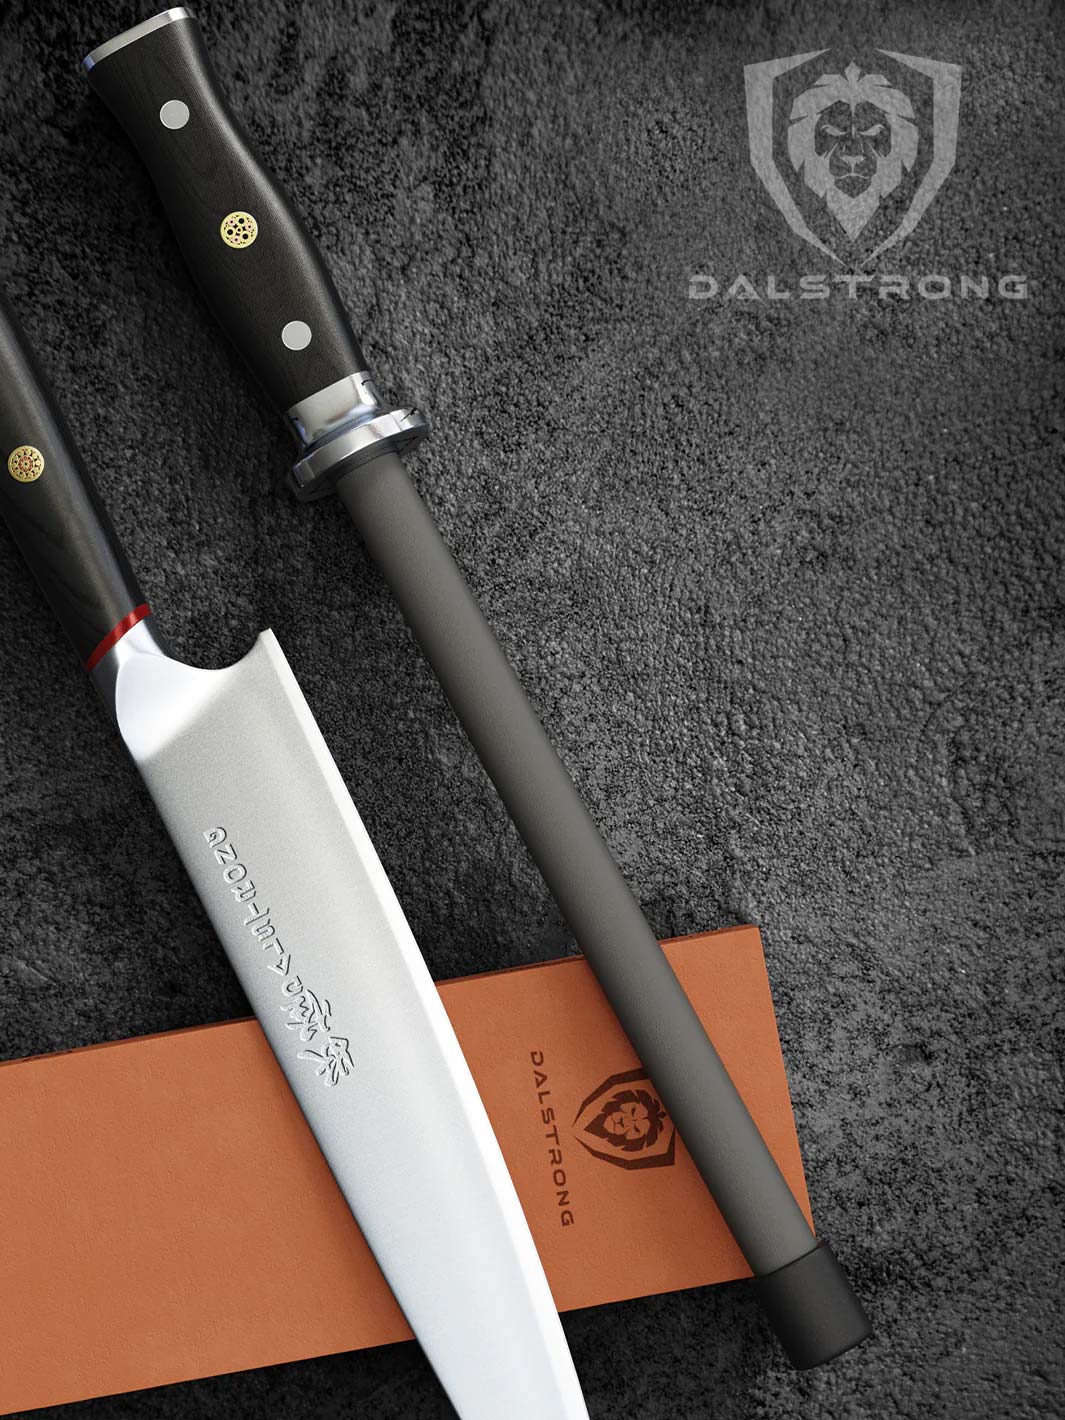 Proper Use and Care of Ceramic Knives ~ Dalstrong Review - Hello